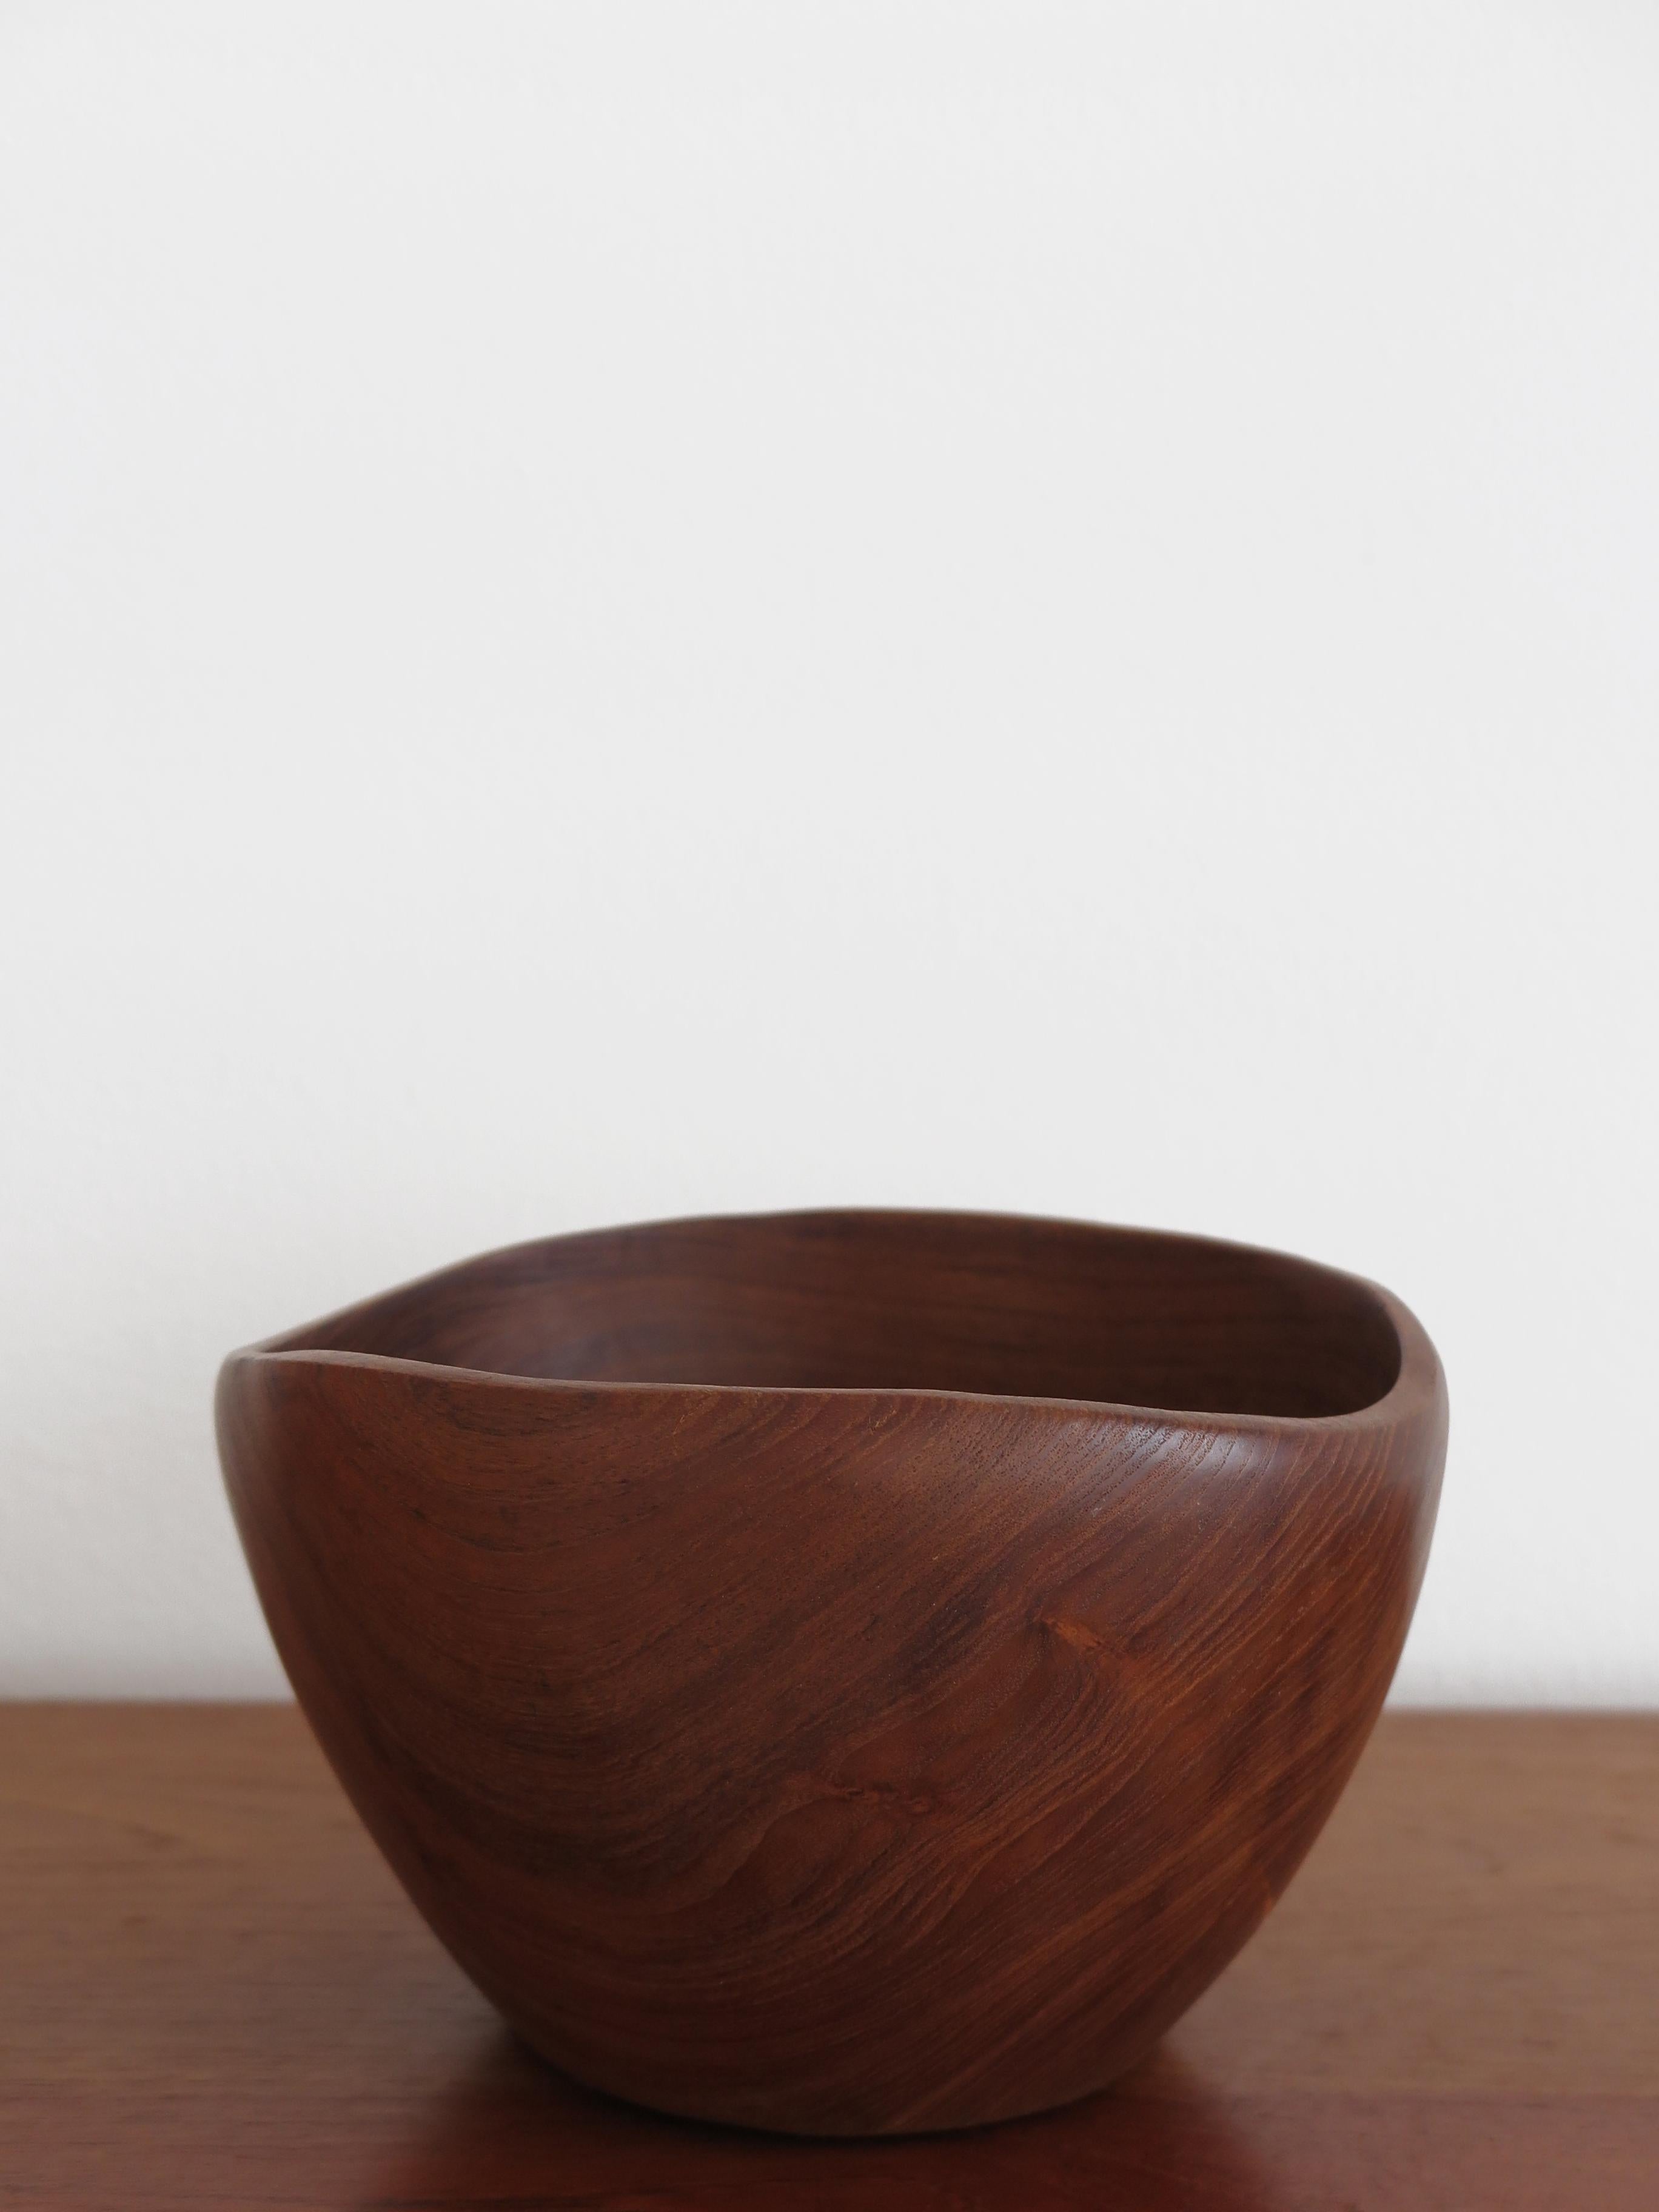 Midcentury moderrn design scandinavian solid wood bowl centerpiece with irregular edge, Denmark 1960s

Please note that the item is original of the period and this shows normal signs of age and use.